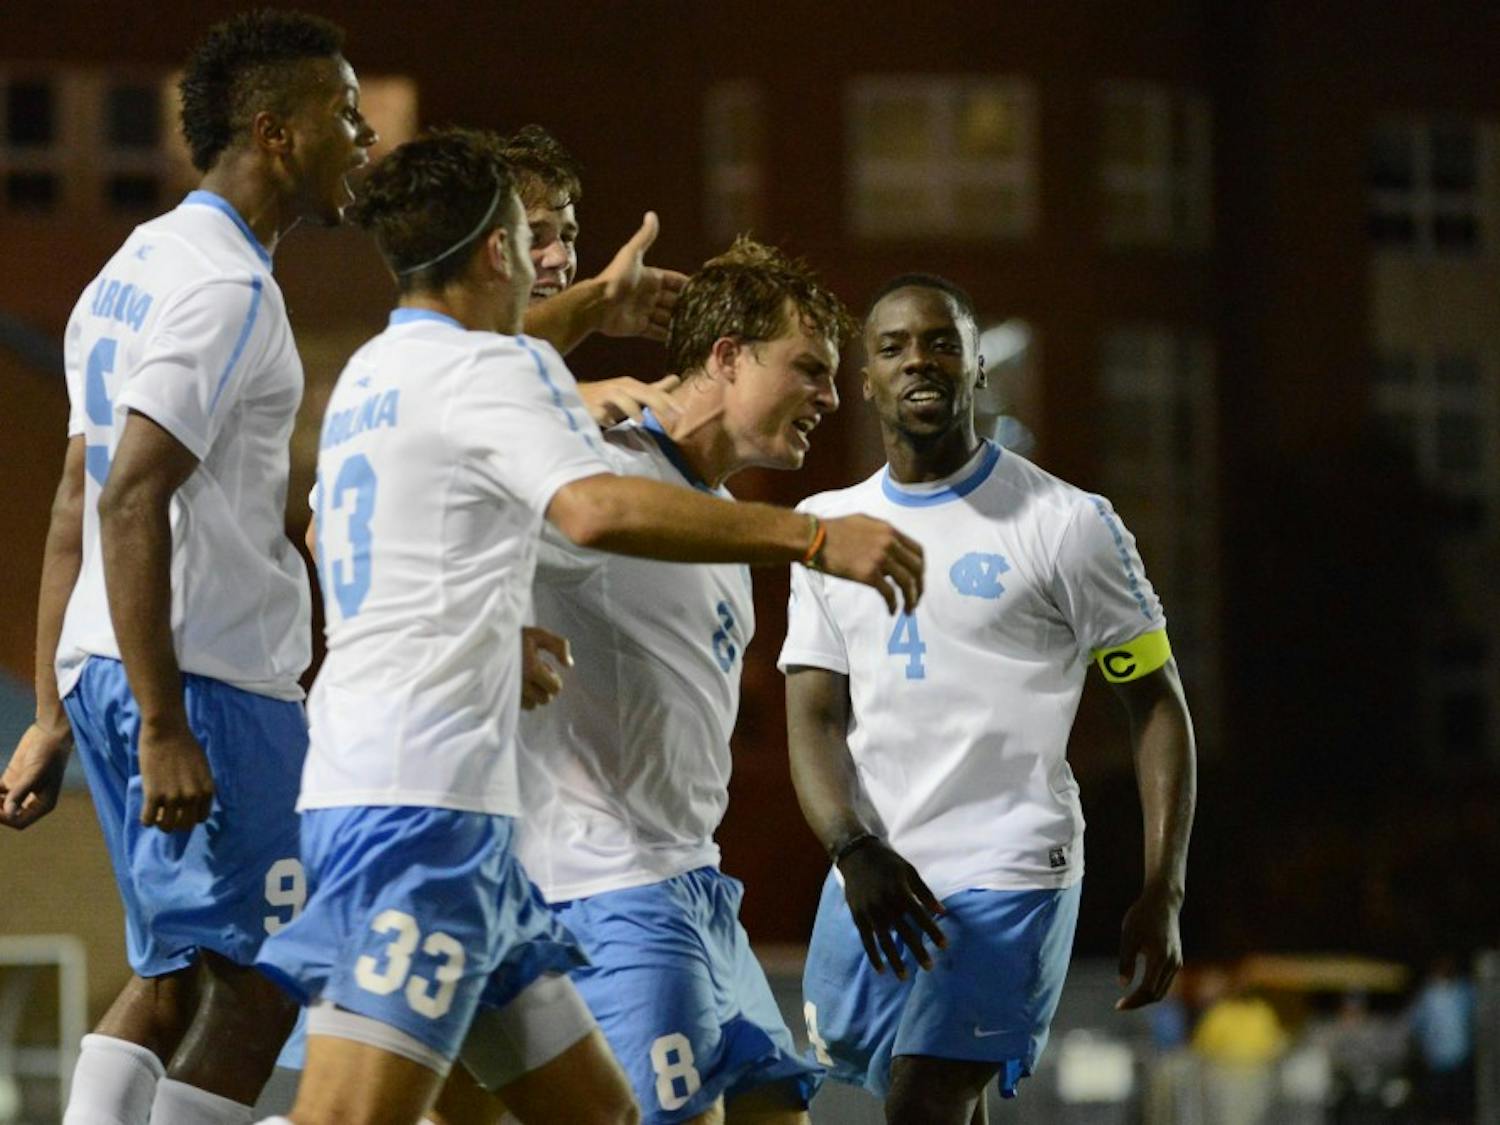 UNC forward Tyler Engel (8) celebrates with teammates after scoring the game winning goal.